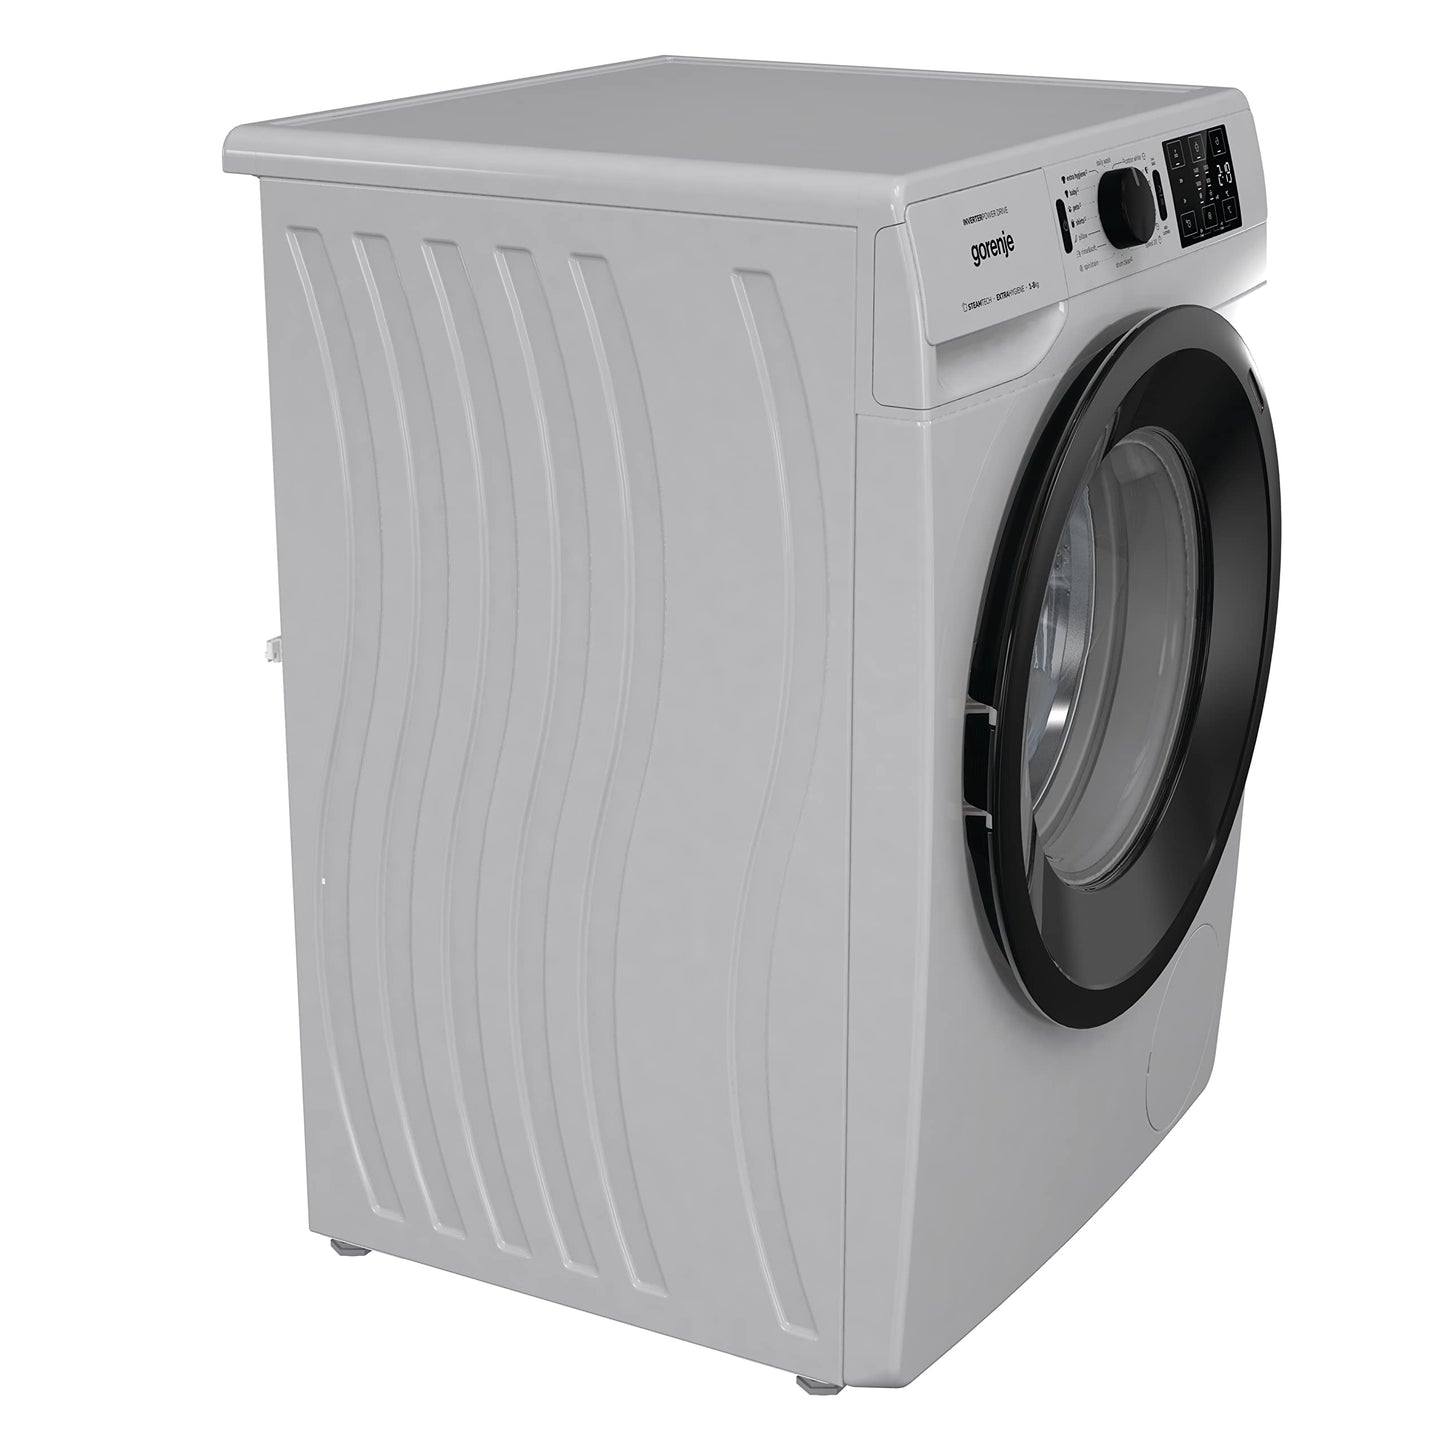 Gorenje WNEI84AS/A, 8 Kg Fully Automatic Front Load Washing Machine, 16 Programs, Energy and Water Efficient, Wave Drum, 1400 RPM, Silver, Made in Slovenia, 1 Year Warranty